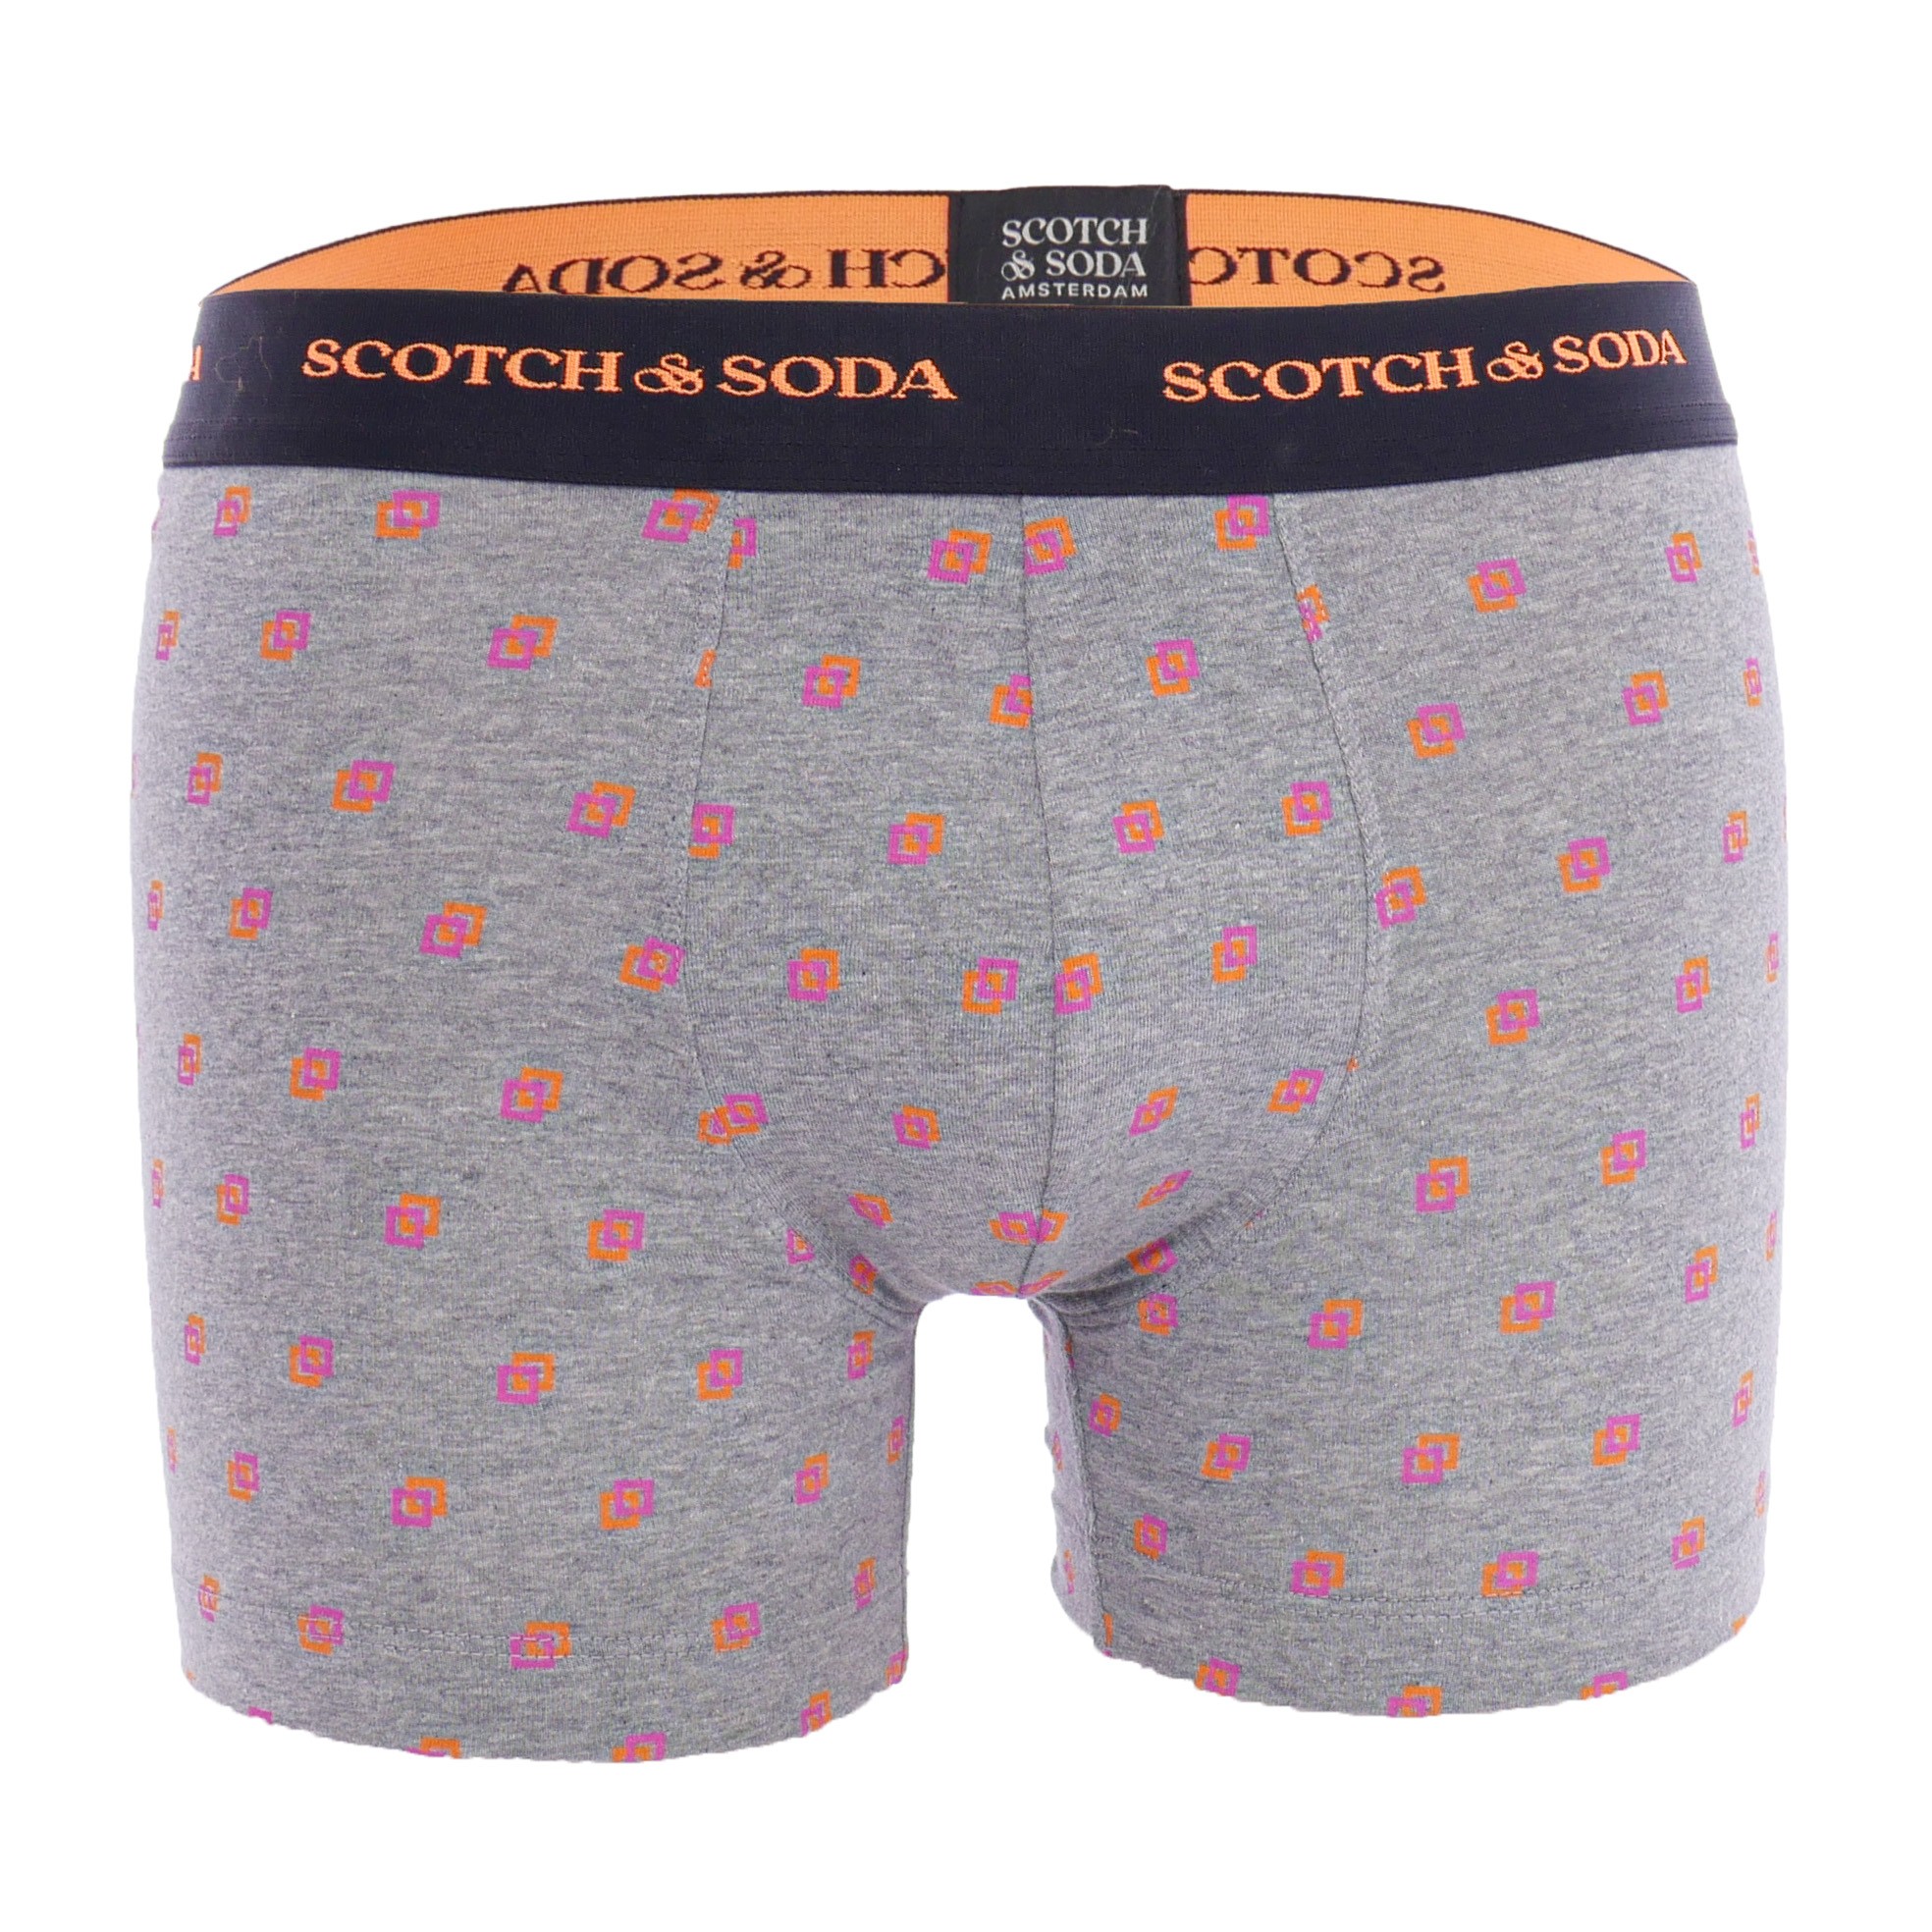 Pack of 2 Printed Boxers in Scotch&Soda Organic Cotton - Black and